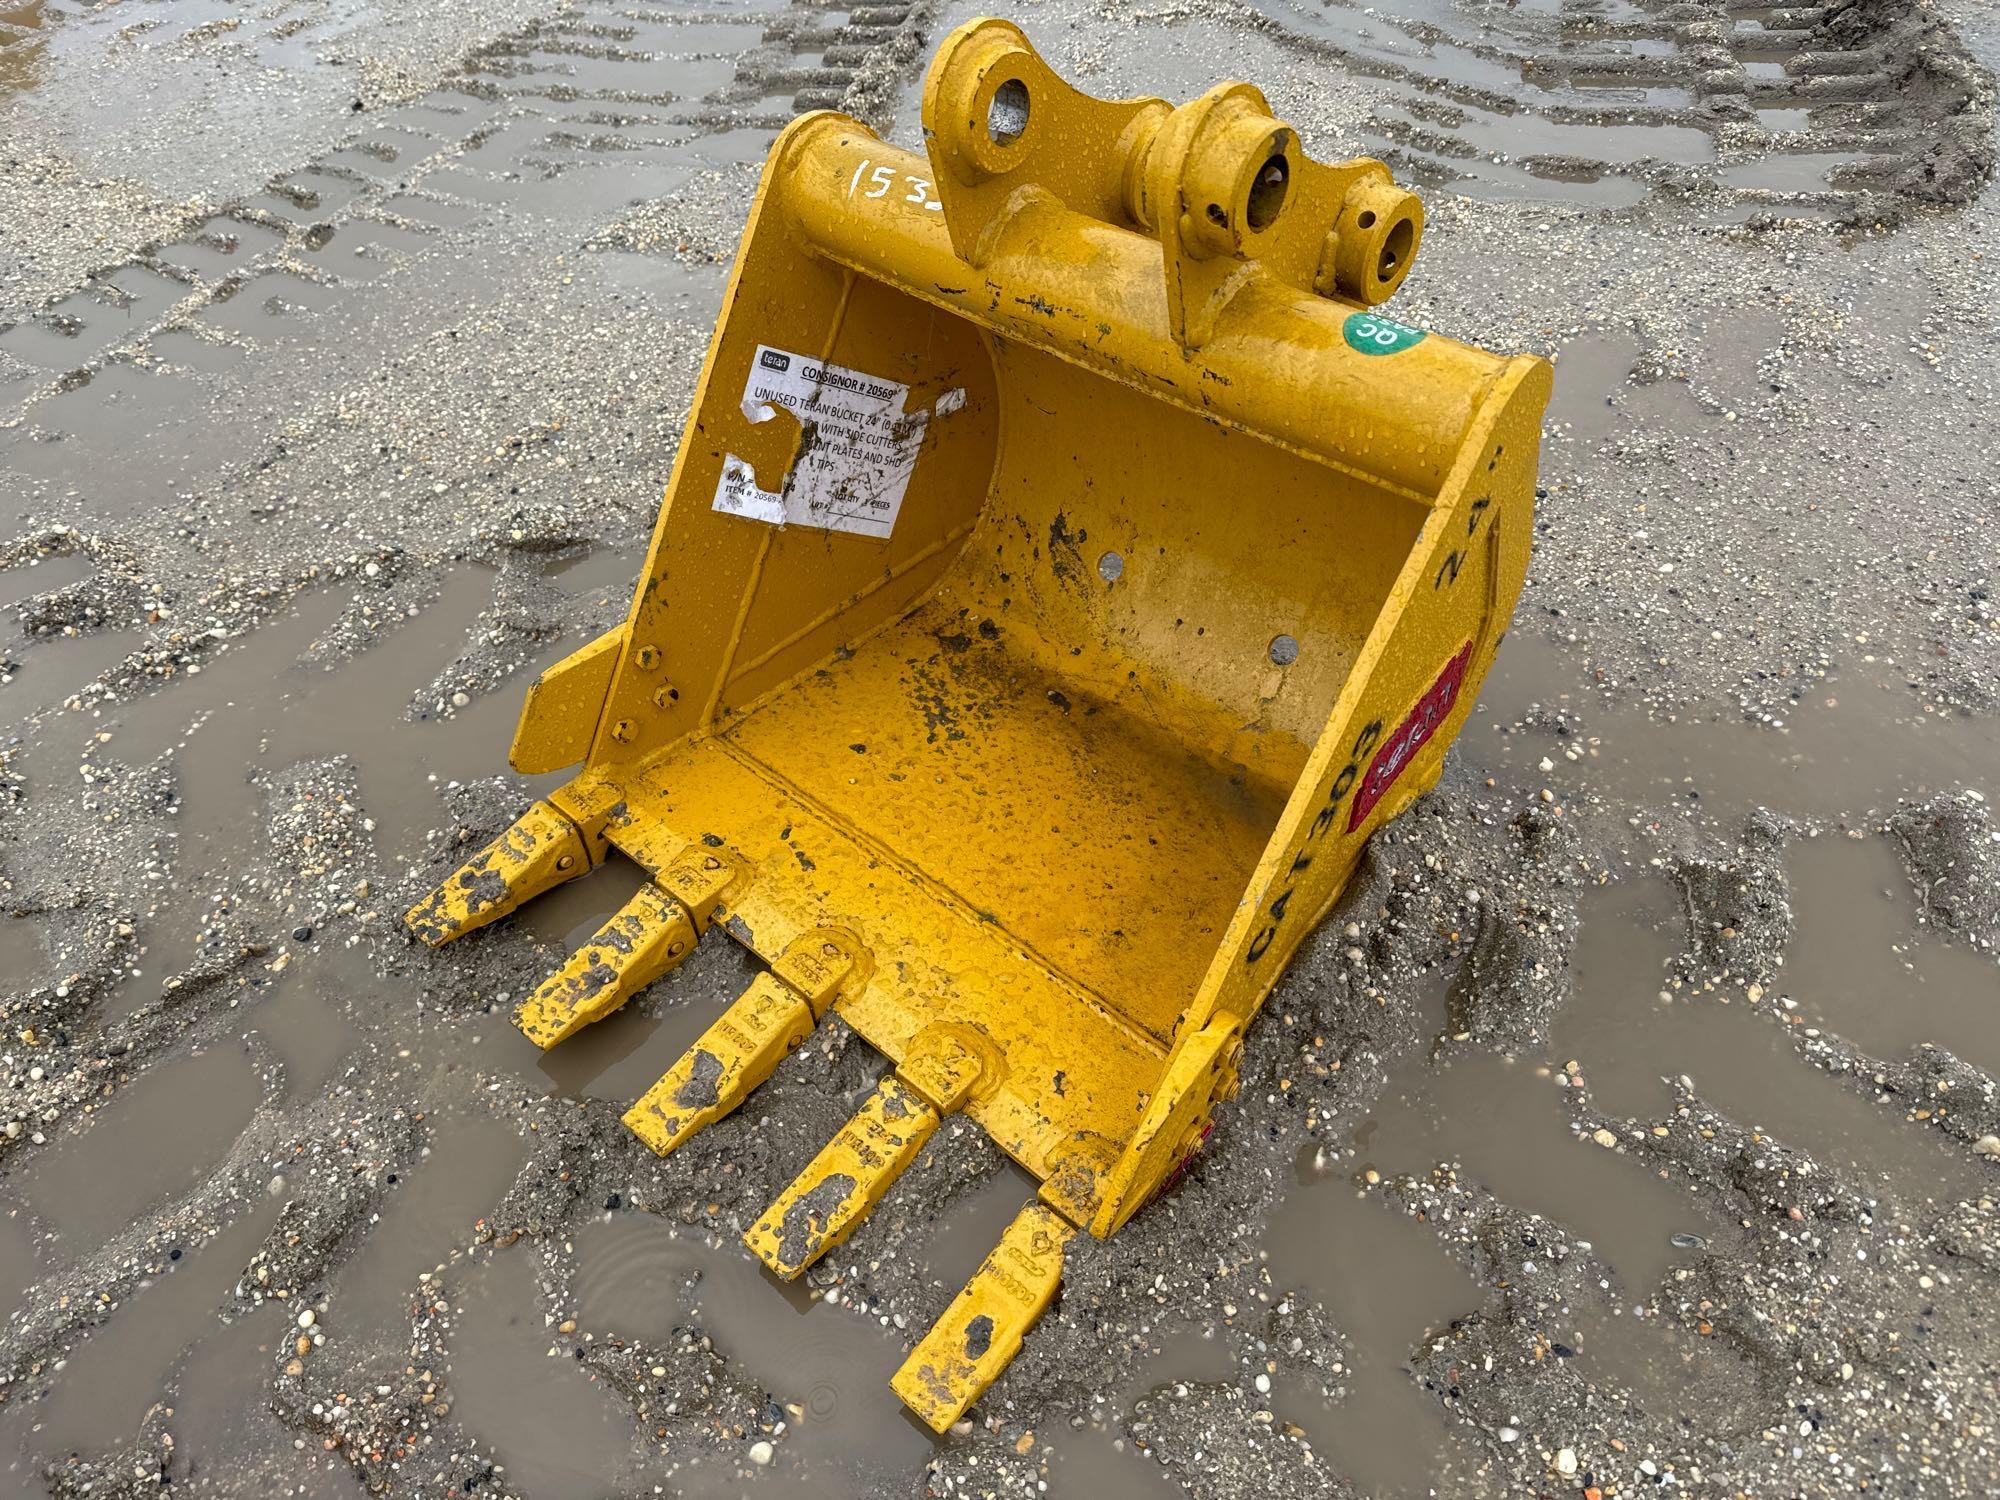 NEW TERAN 24IN. DIGGING BUCKET EXCAVATOR BUCKET FOR CAT 303 WITH SIDE CUTTERS, REINFORCEMENT PLATES